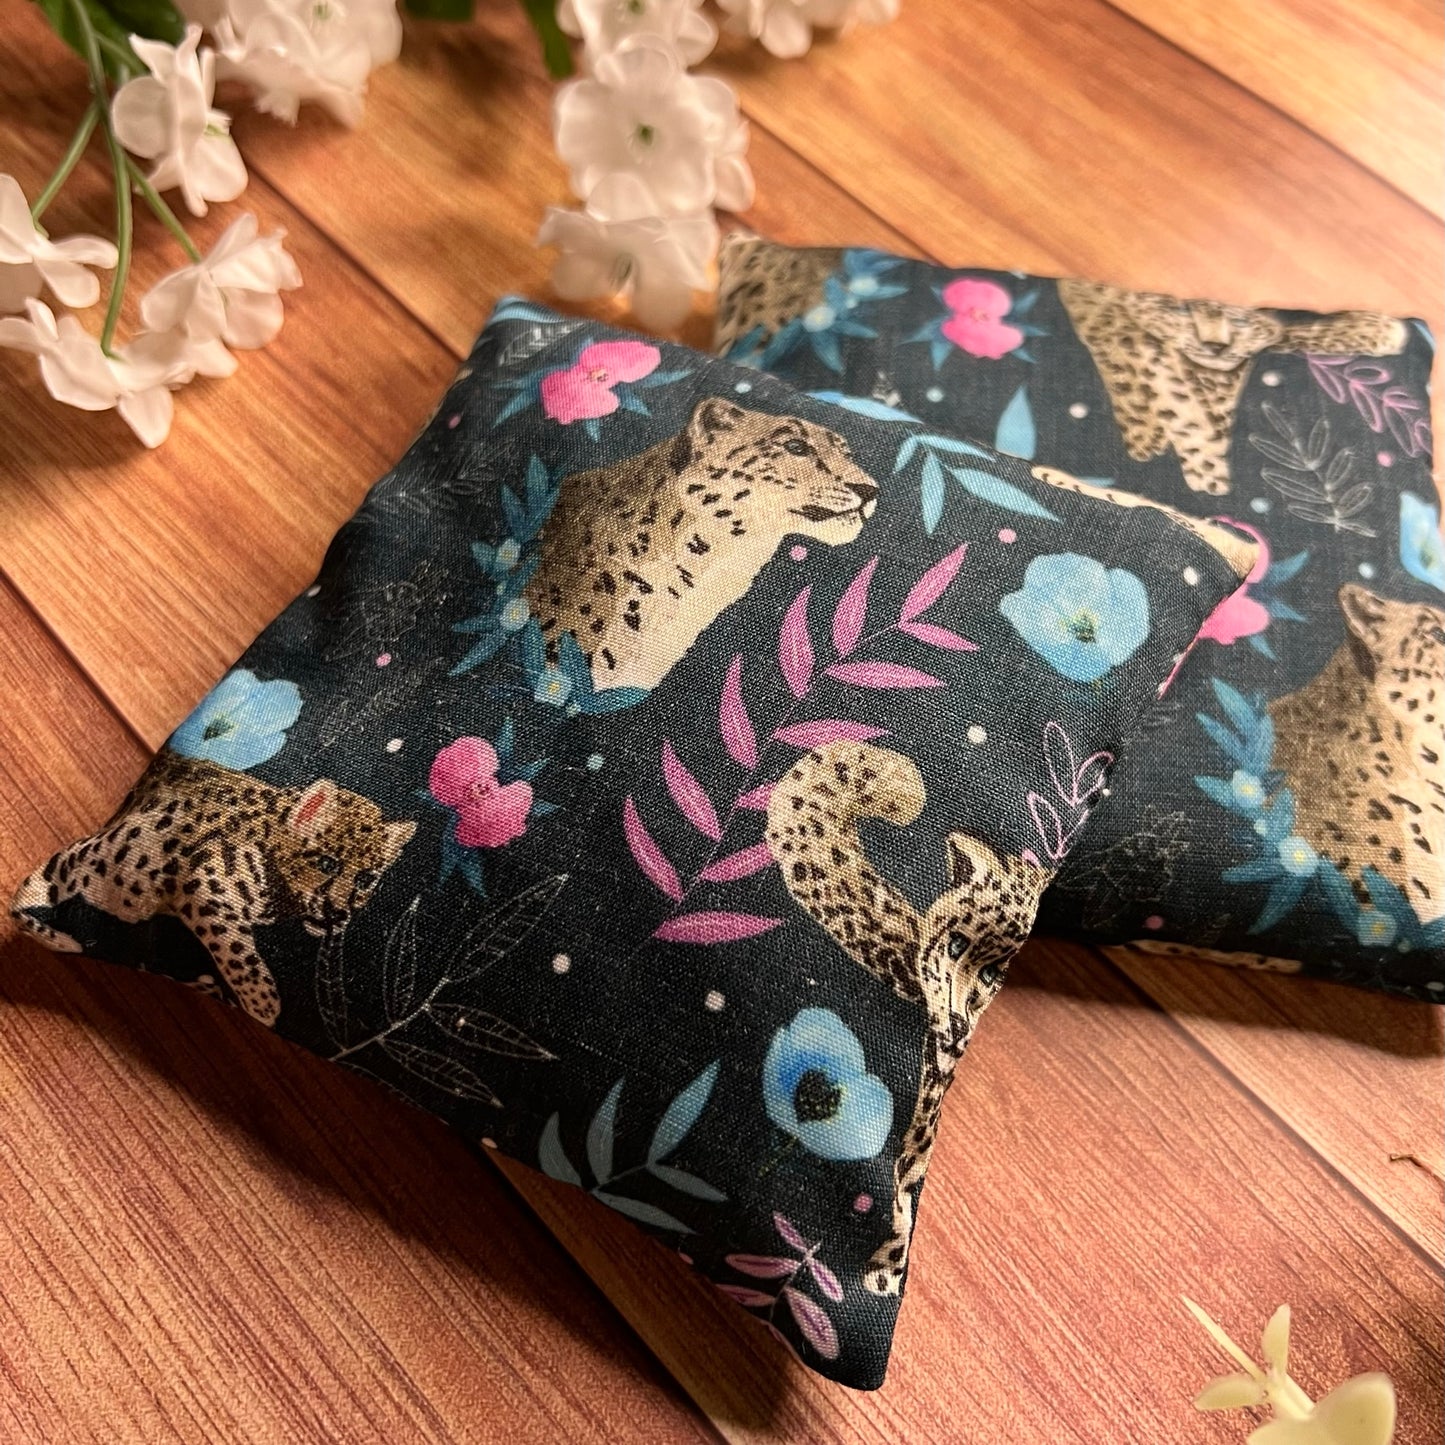 DIY Snow Leopard Handwarmers - Make Your Own Lavender-Scented Heated Bags